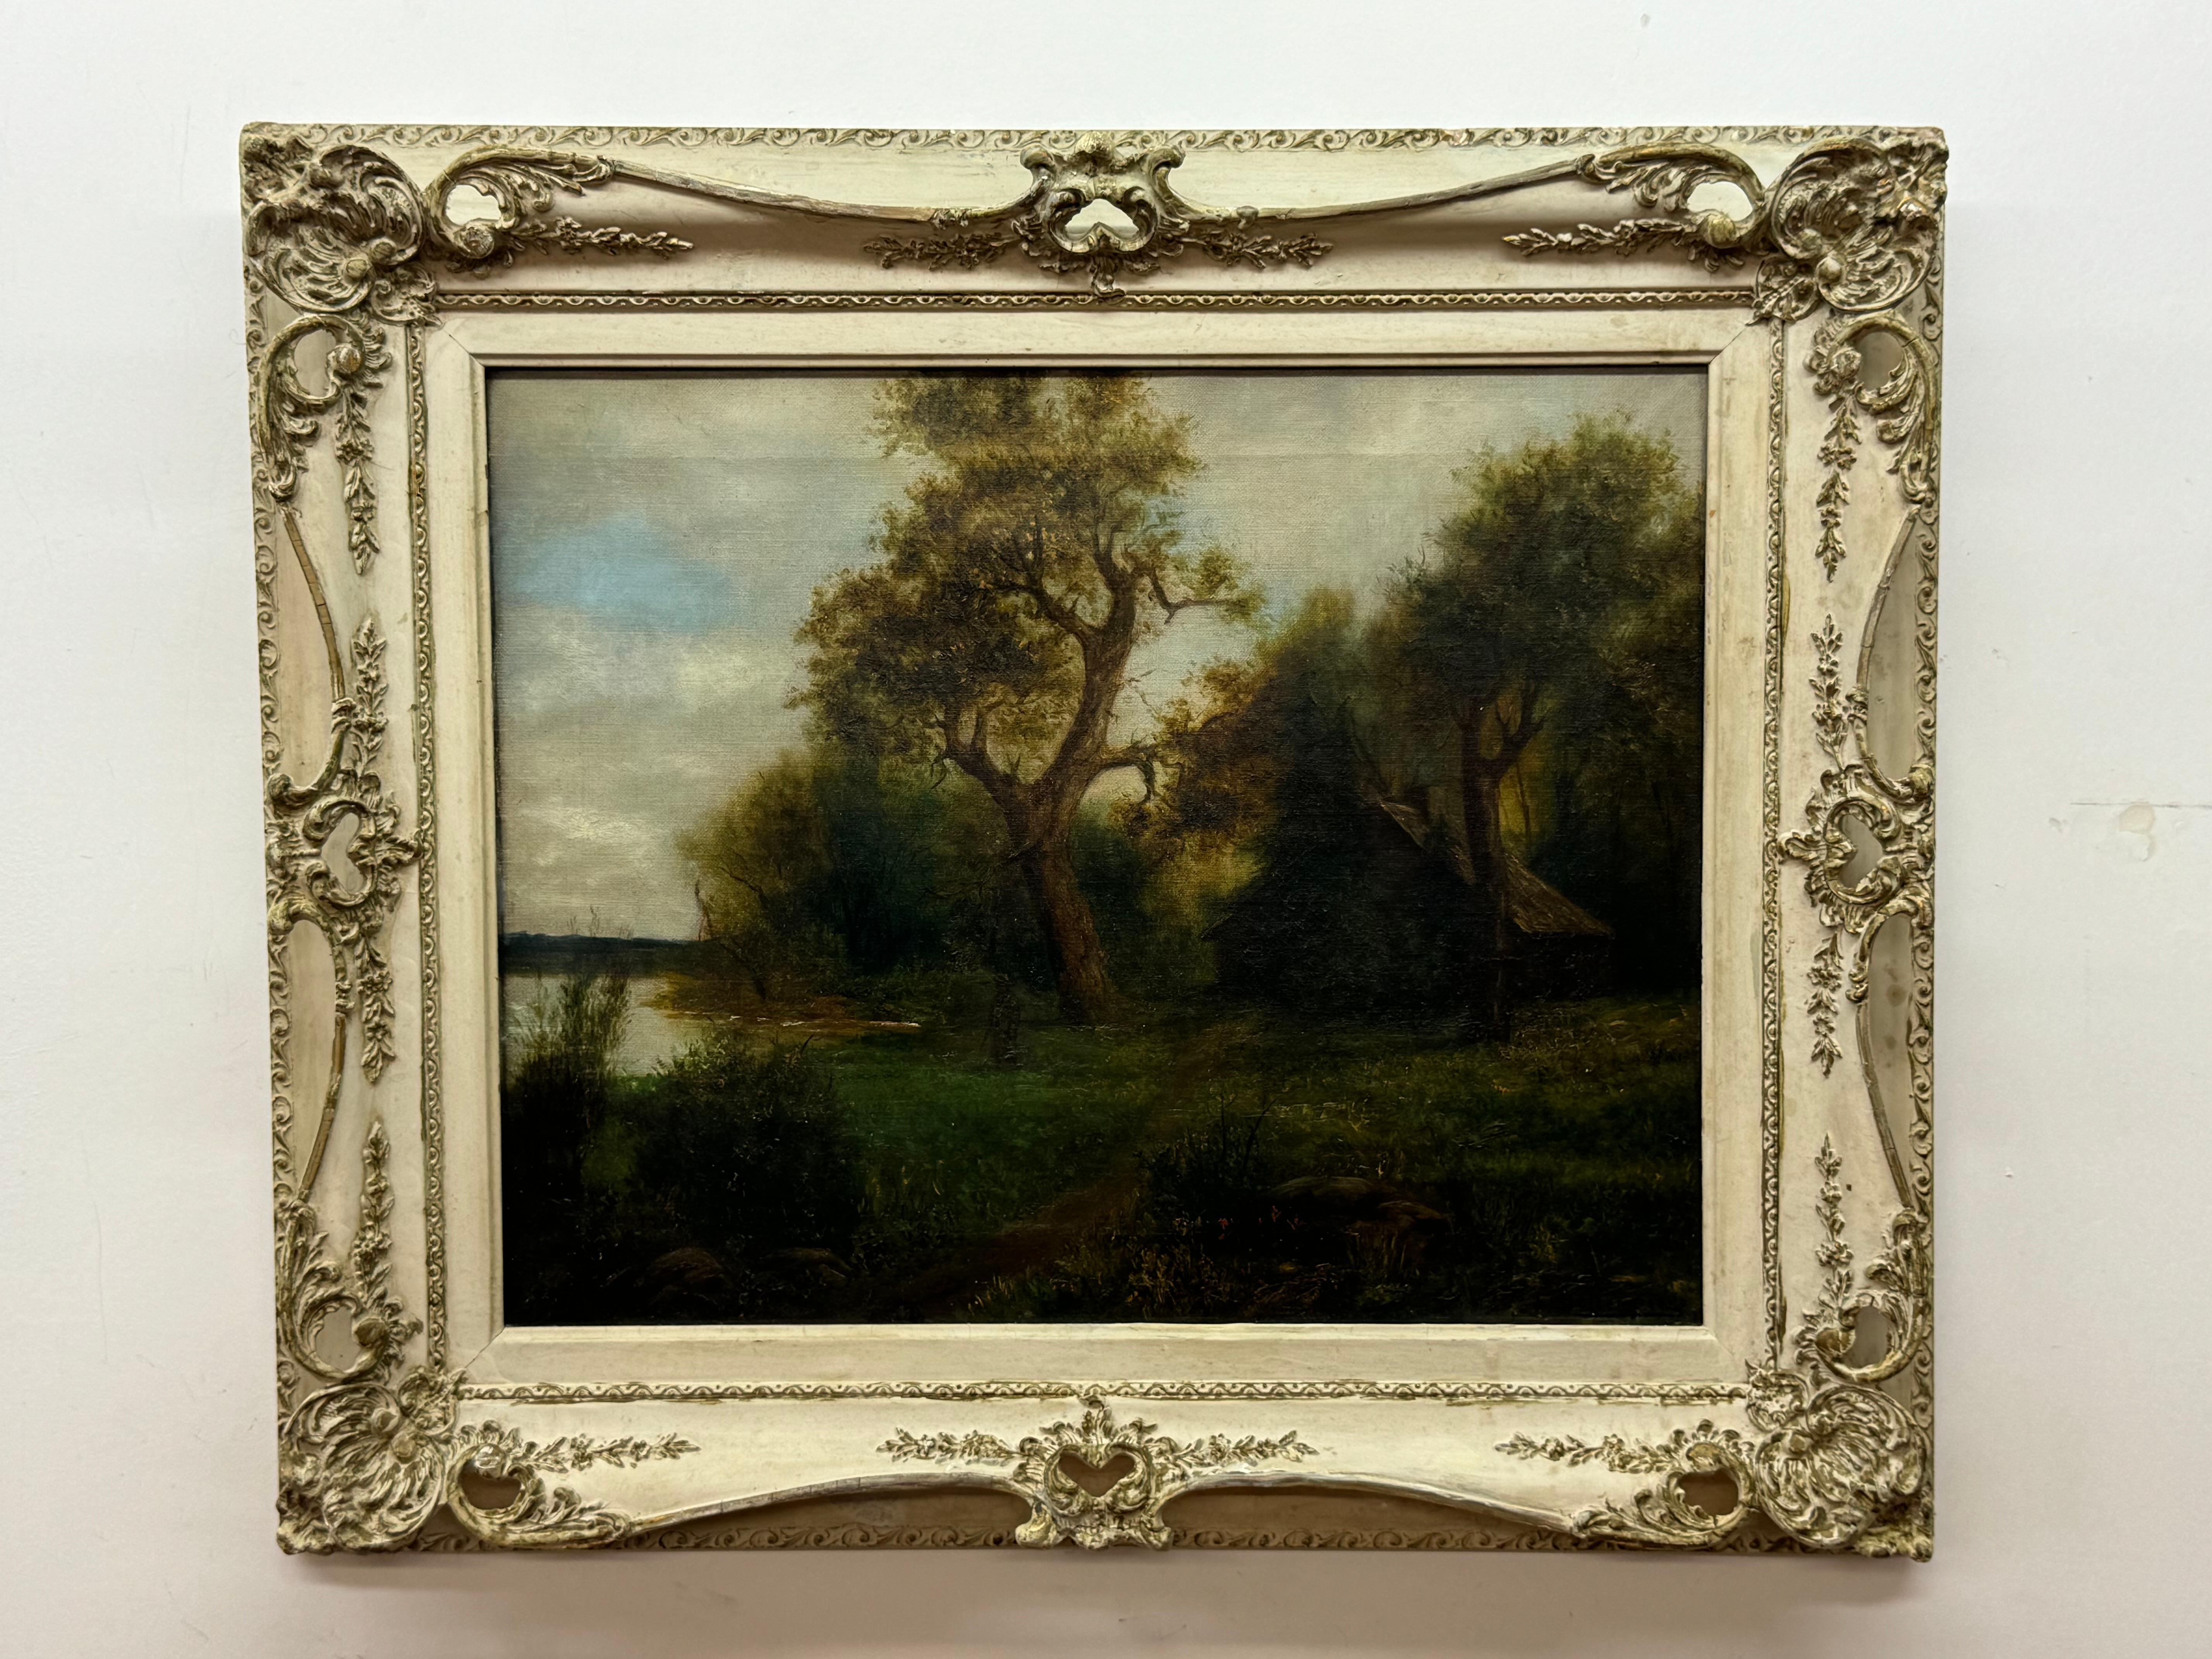 F. Stoltenberg wooded landscape with trail to a cottage

19 century

Oil on canvas

16 x 20 unframed, 23 x 27 framed